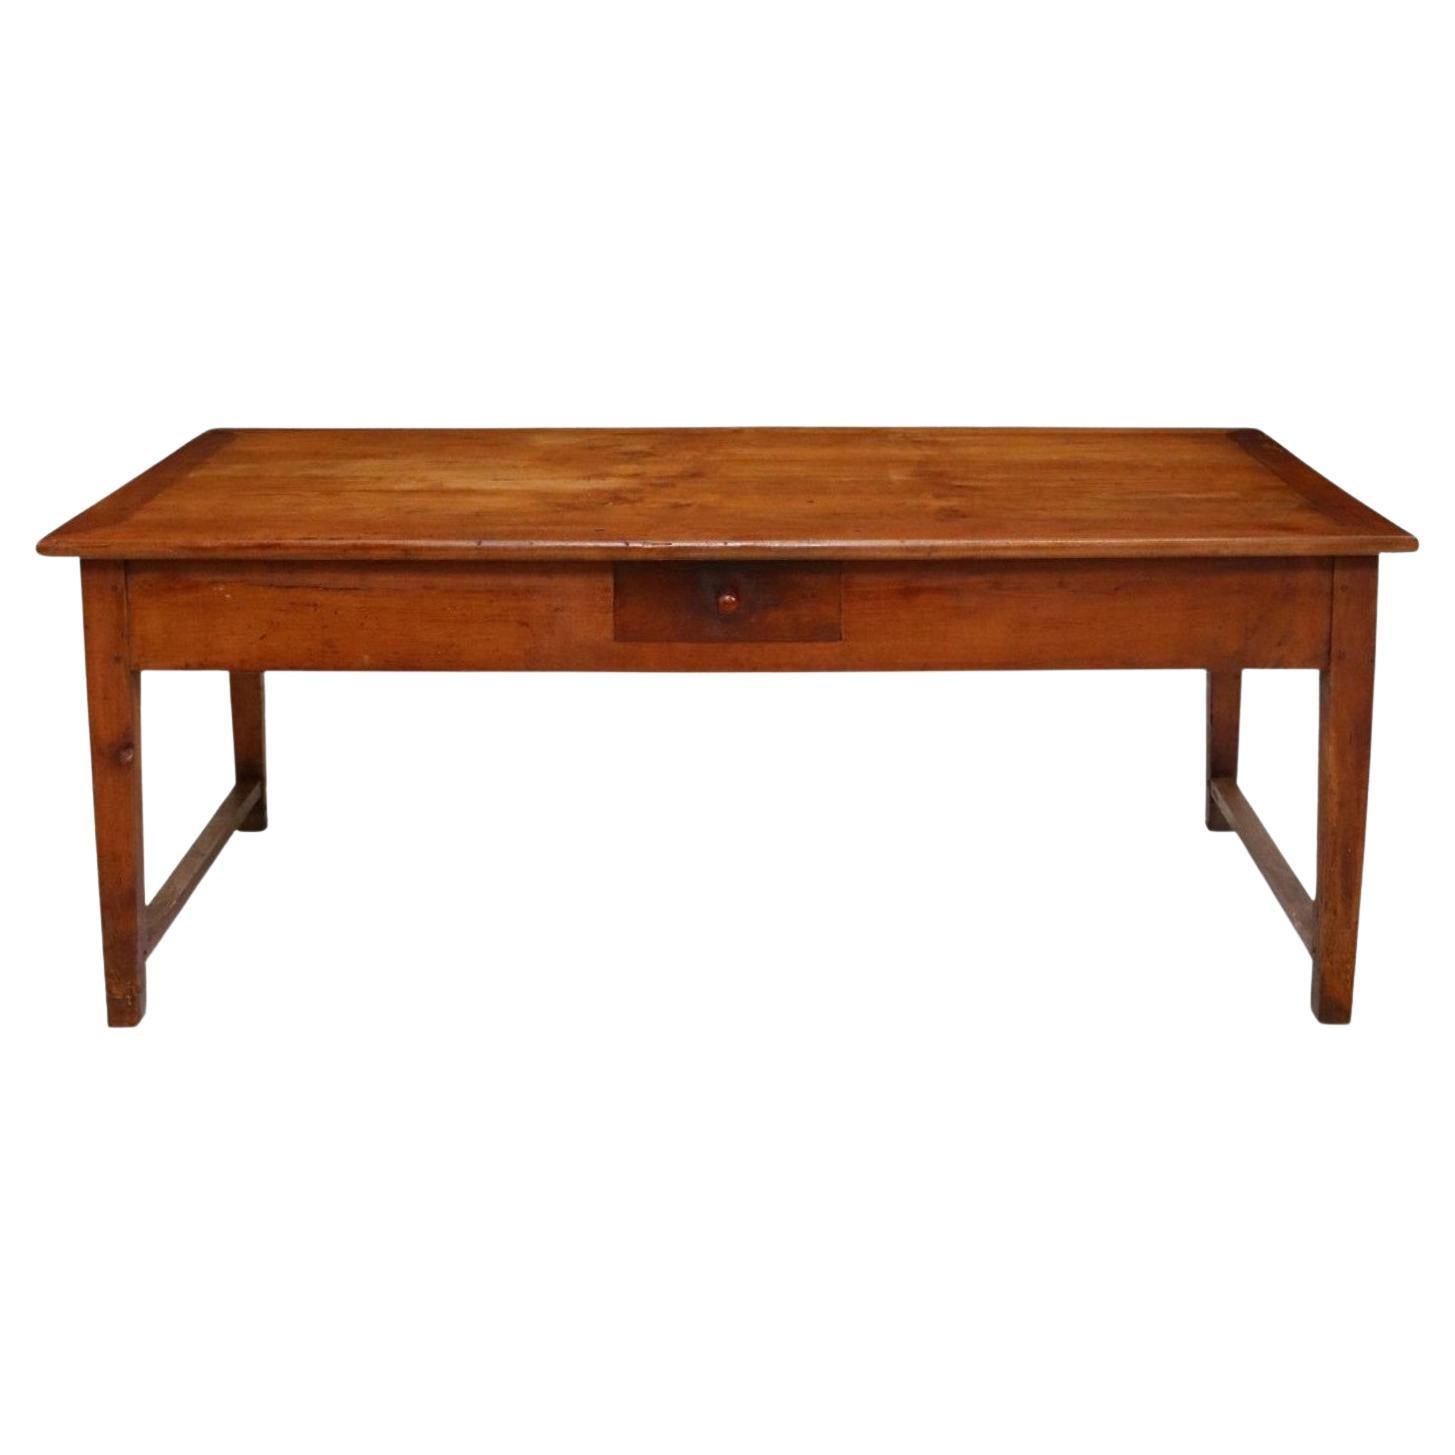 19th Century French Provincial Fruitwood Farmhouse Table For Sale